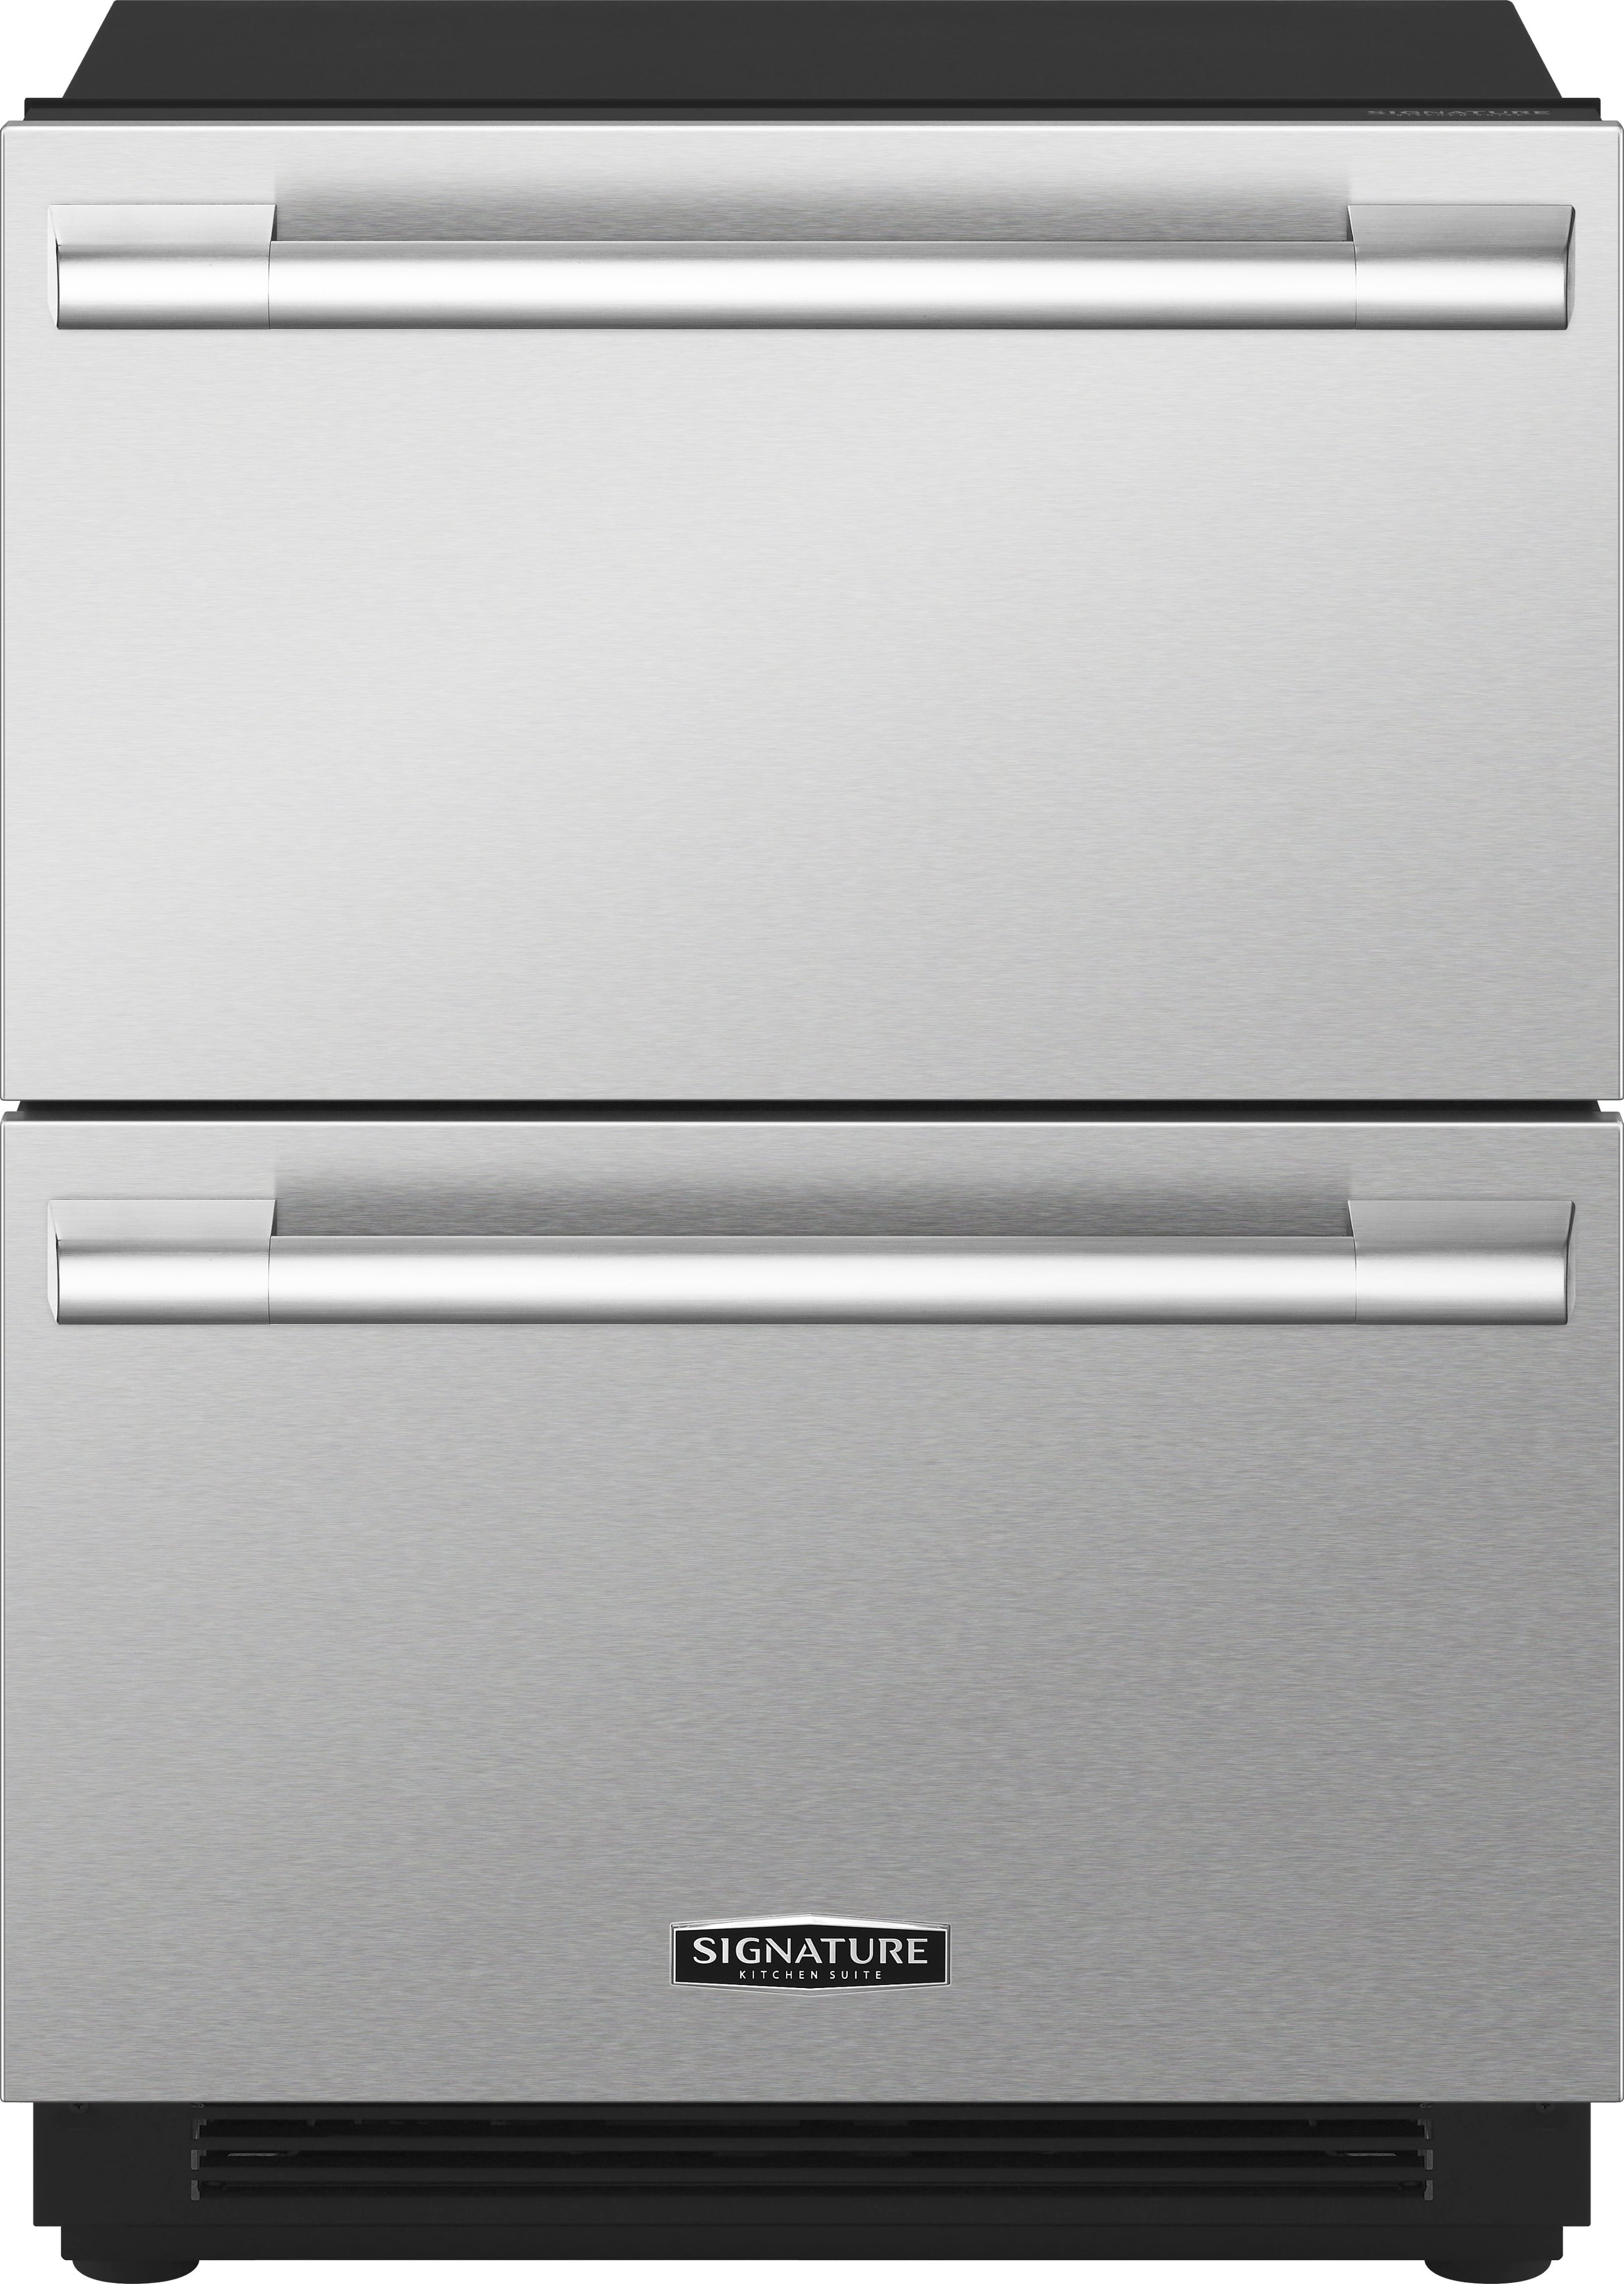 24″ Undercounter Refrigerator Drawer Solid Stainless